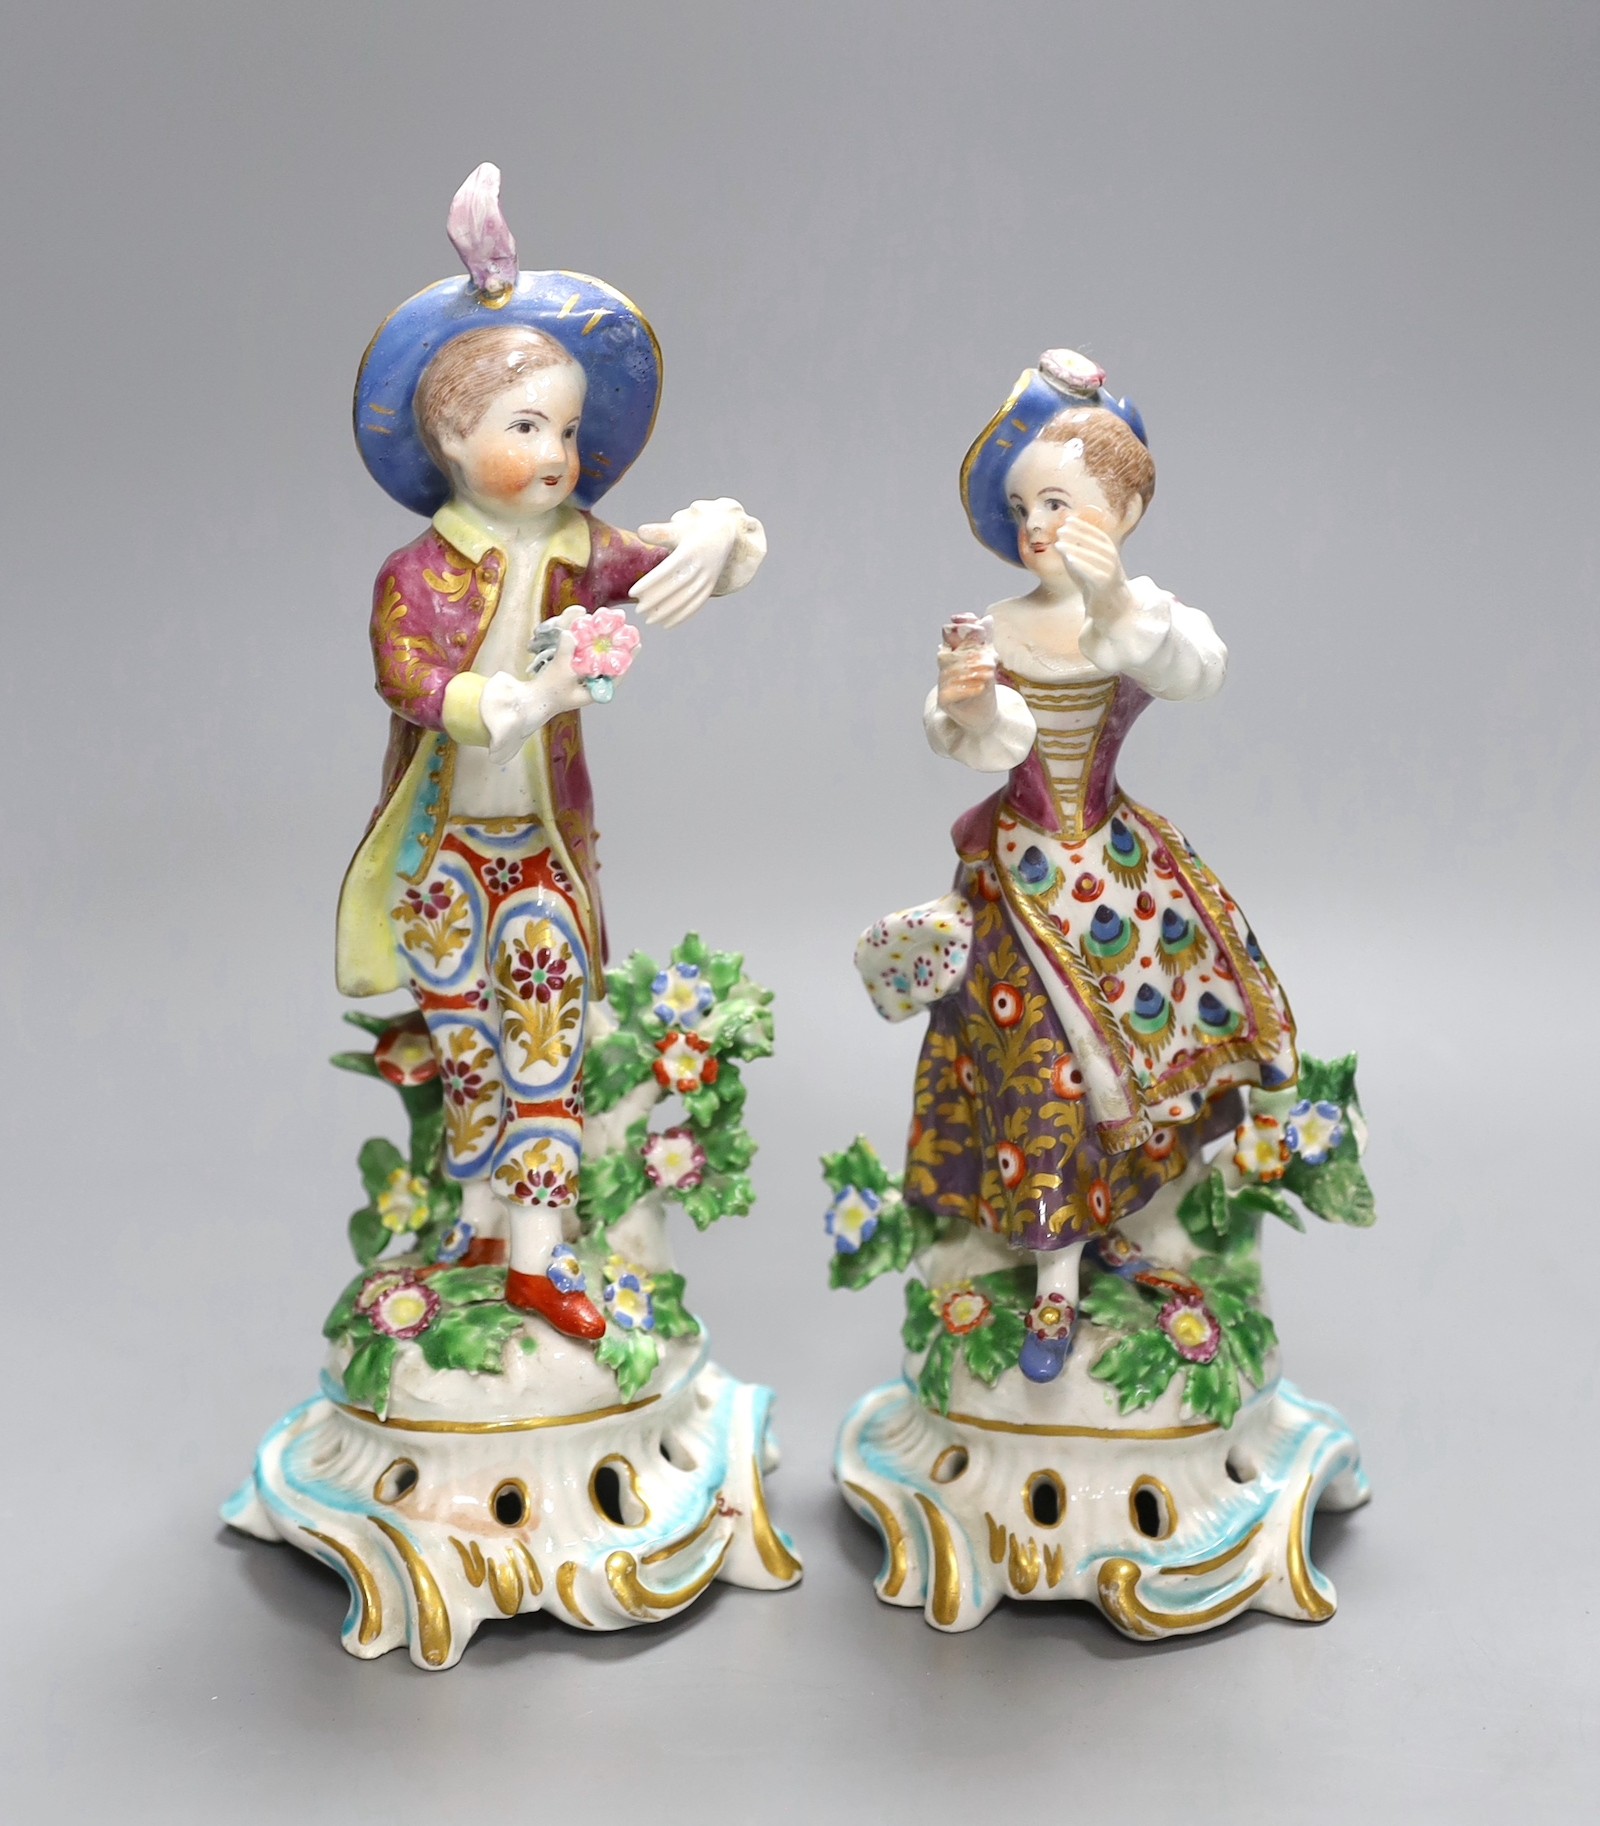 Two Bow figures of New Dancers, each standing on a rococo scroll base, c.1765-70, 21cm